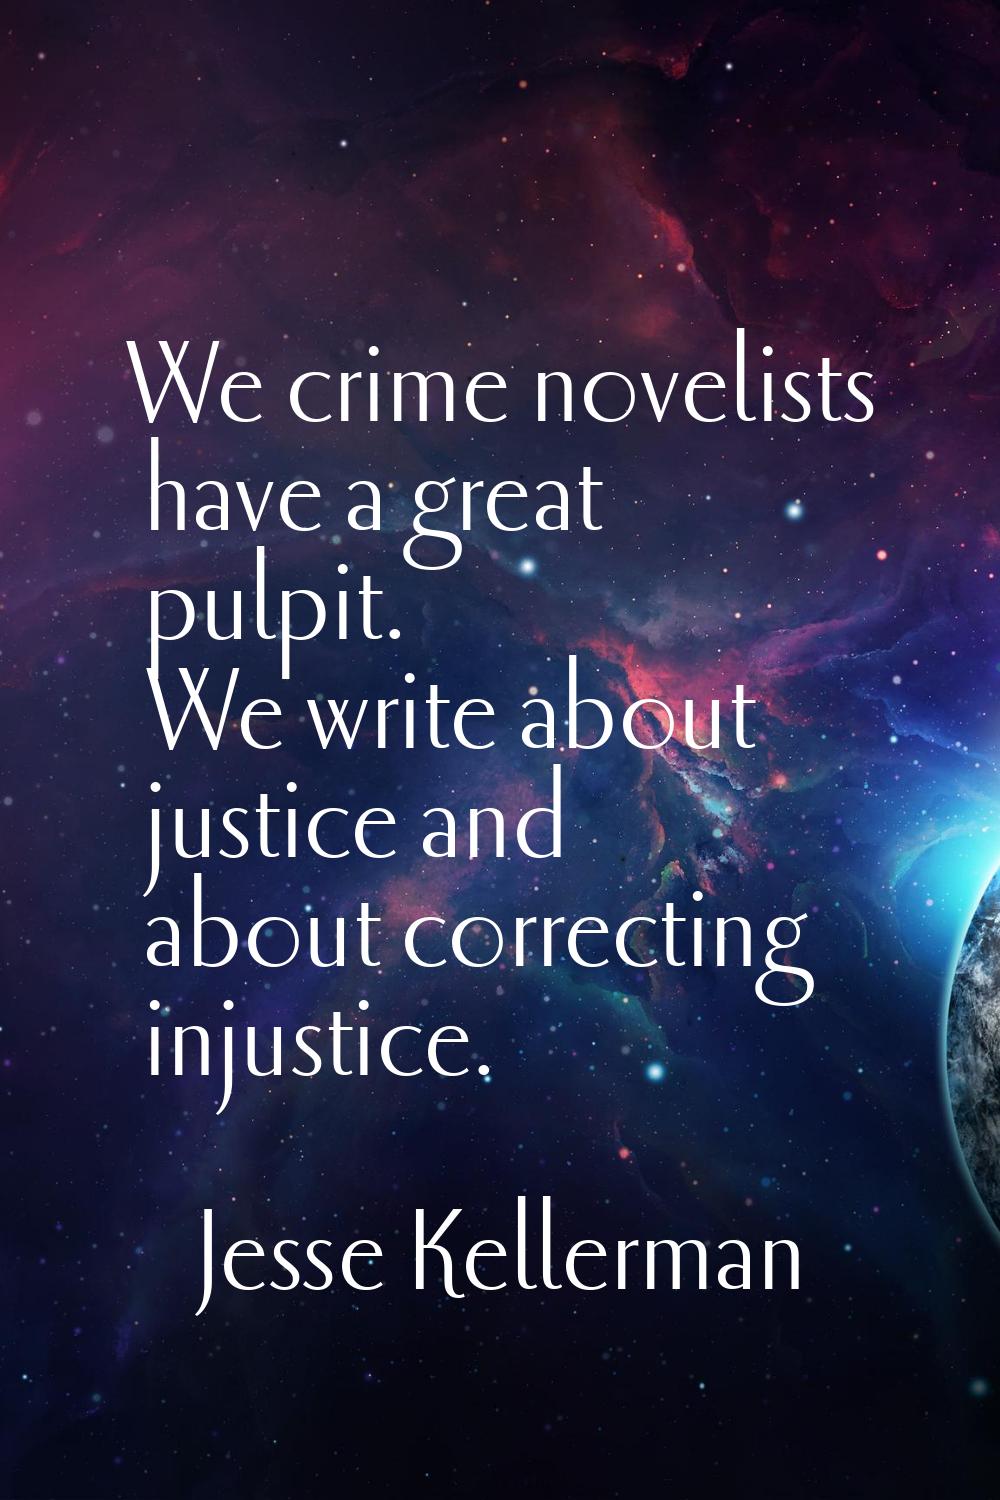 We crime novelists have a great pulpit. We write about justice and about correcting injustice.